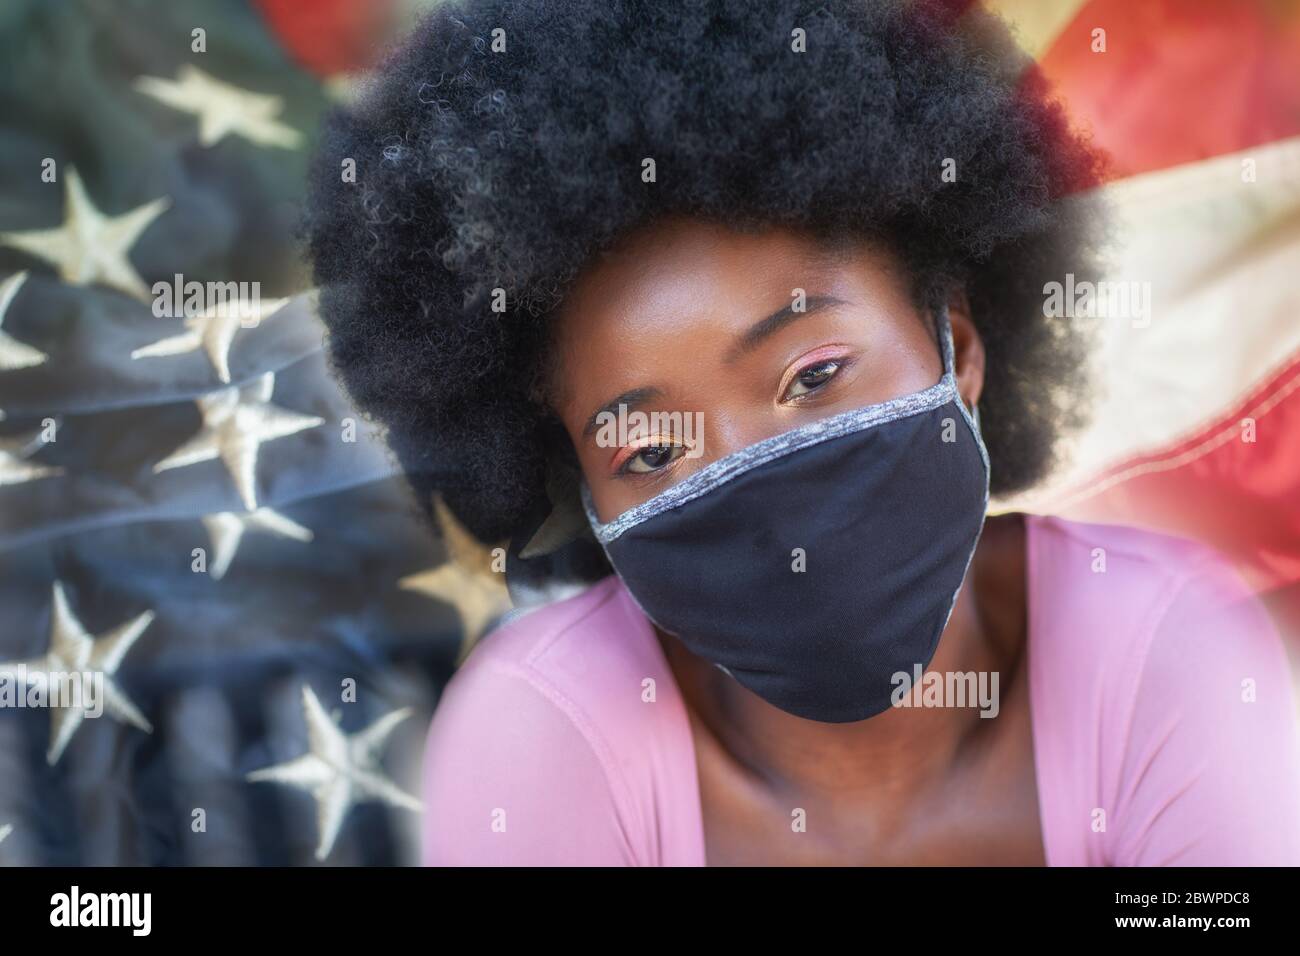 A portrait of a beautiful black girl wearing face masks with the USA flag on the background. Stock Photo